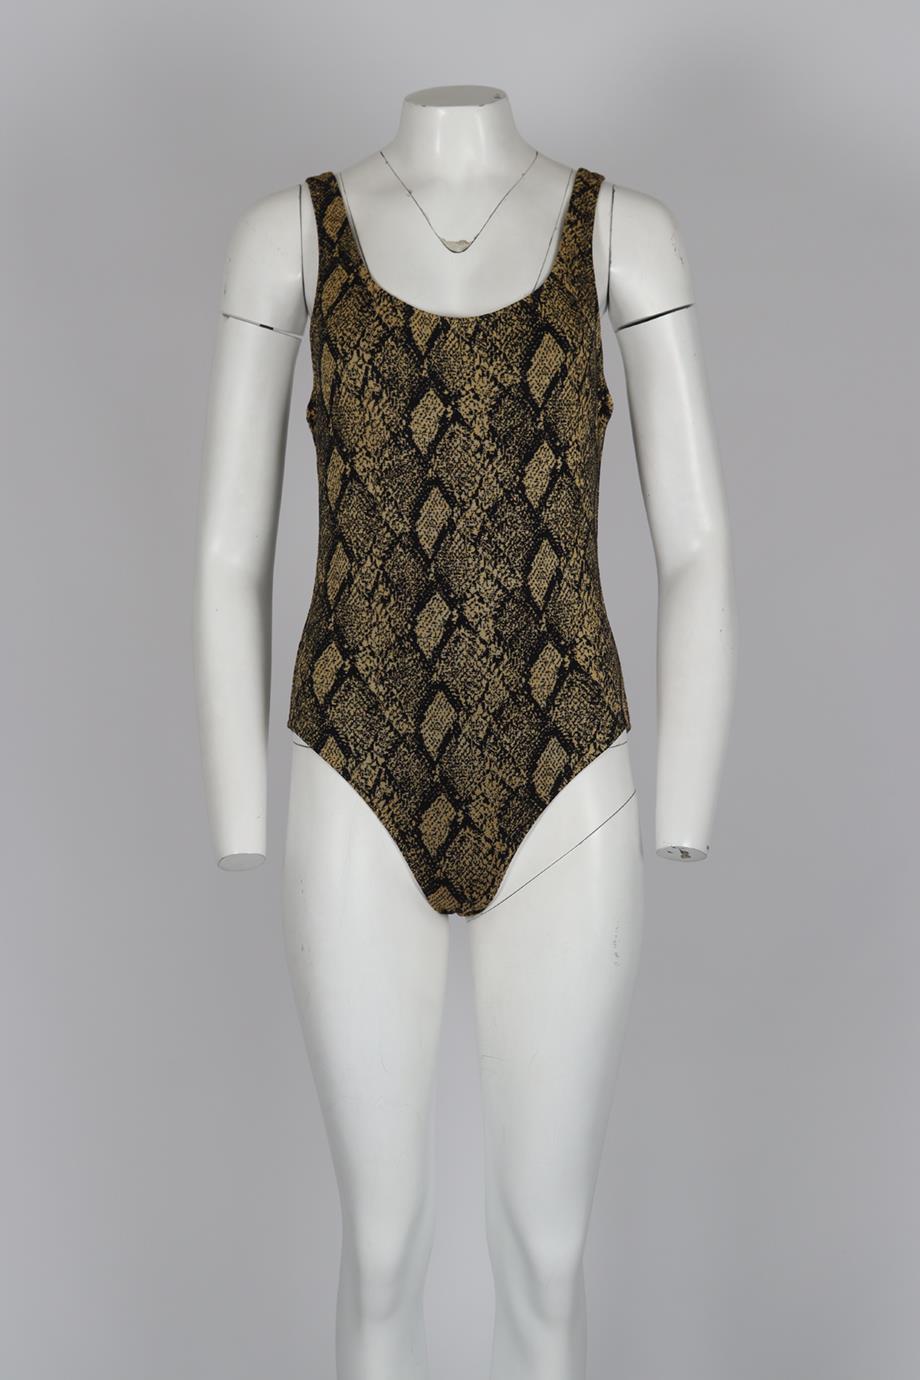 SOLID AND STRIPED SNAKE PRINT SWIMSUIT XLARGE